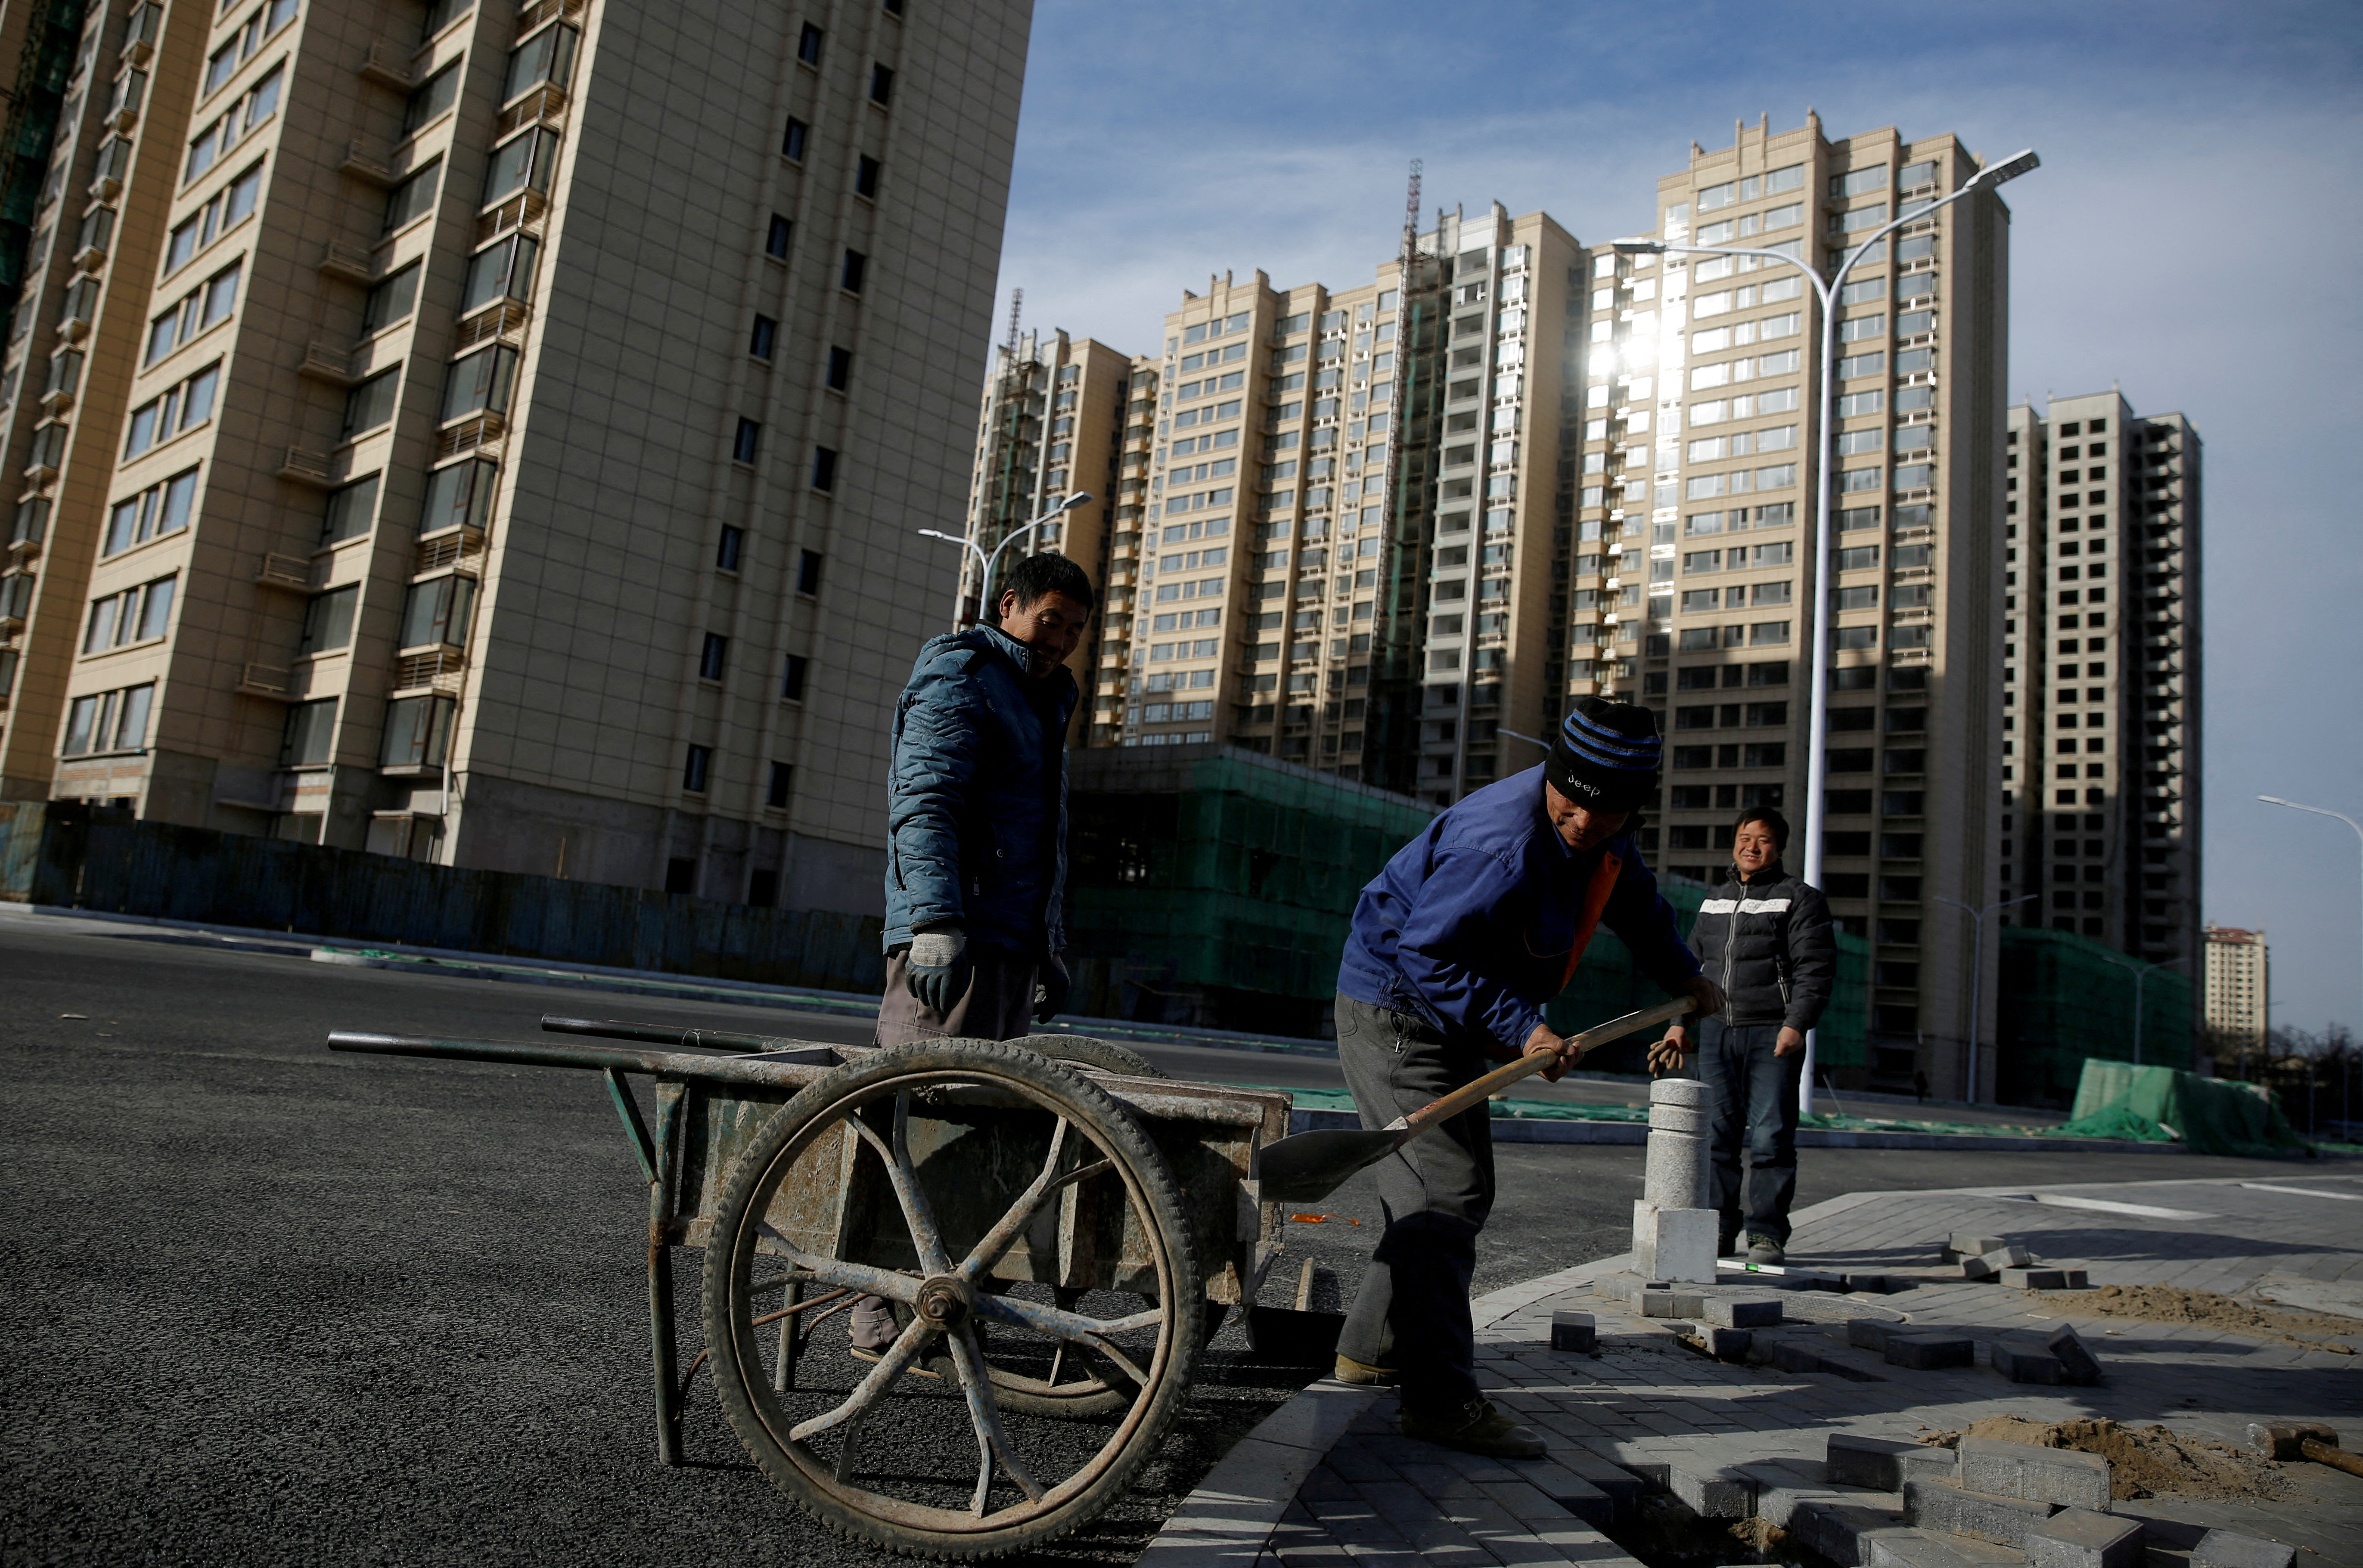 Men work near residential apartment blocks under construction on the outskirts of Beijing, China